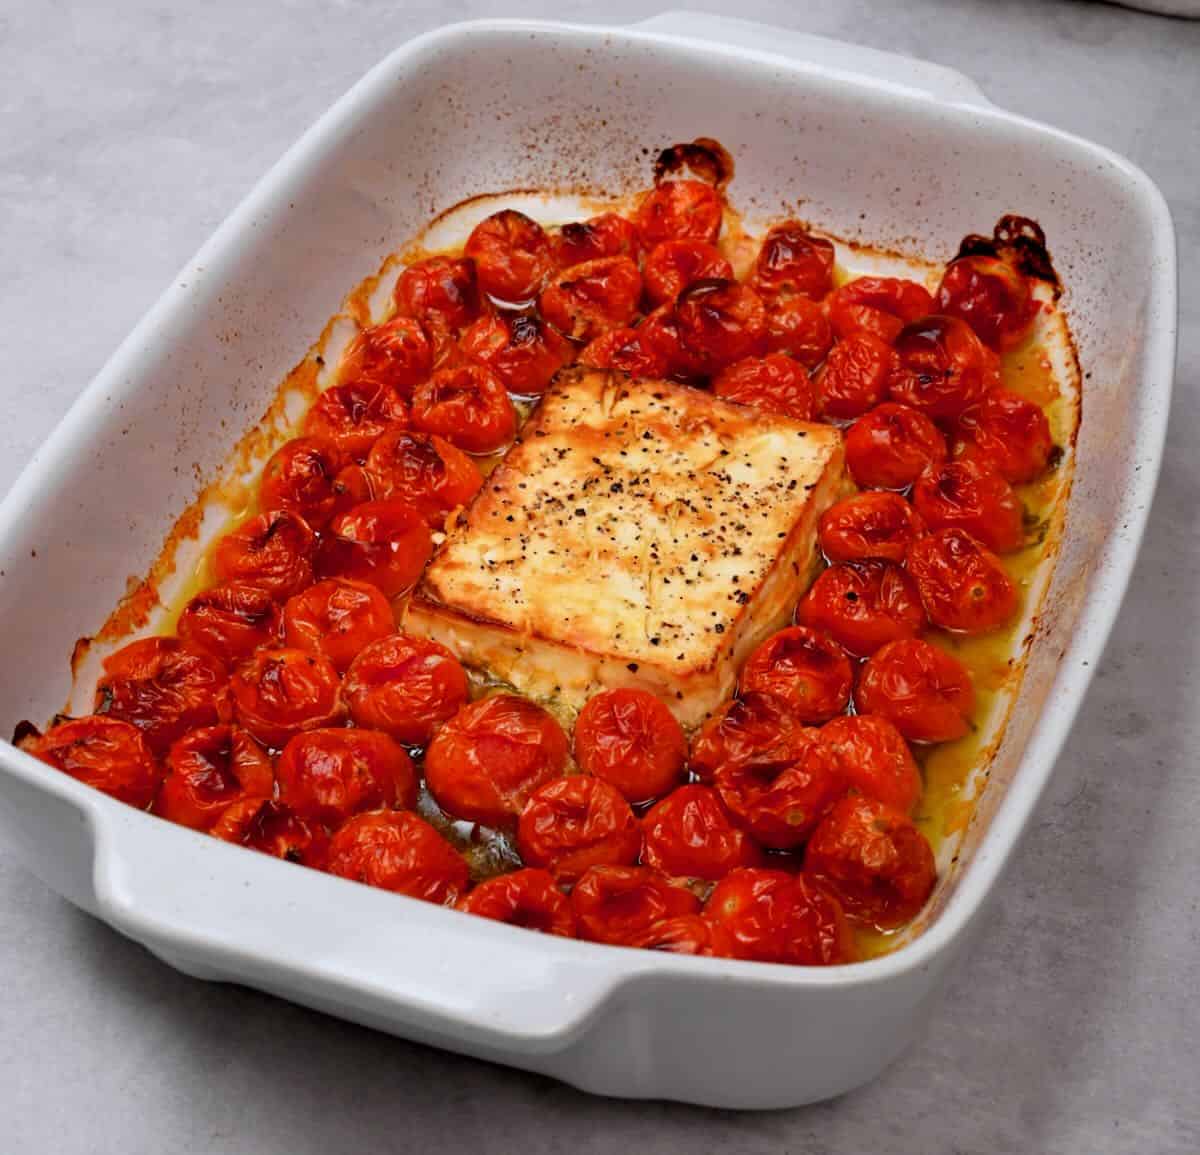 A dish with baked feta and cherry tomatoes